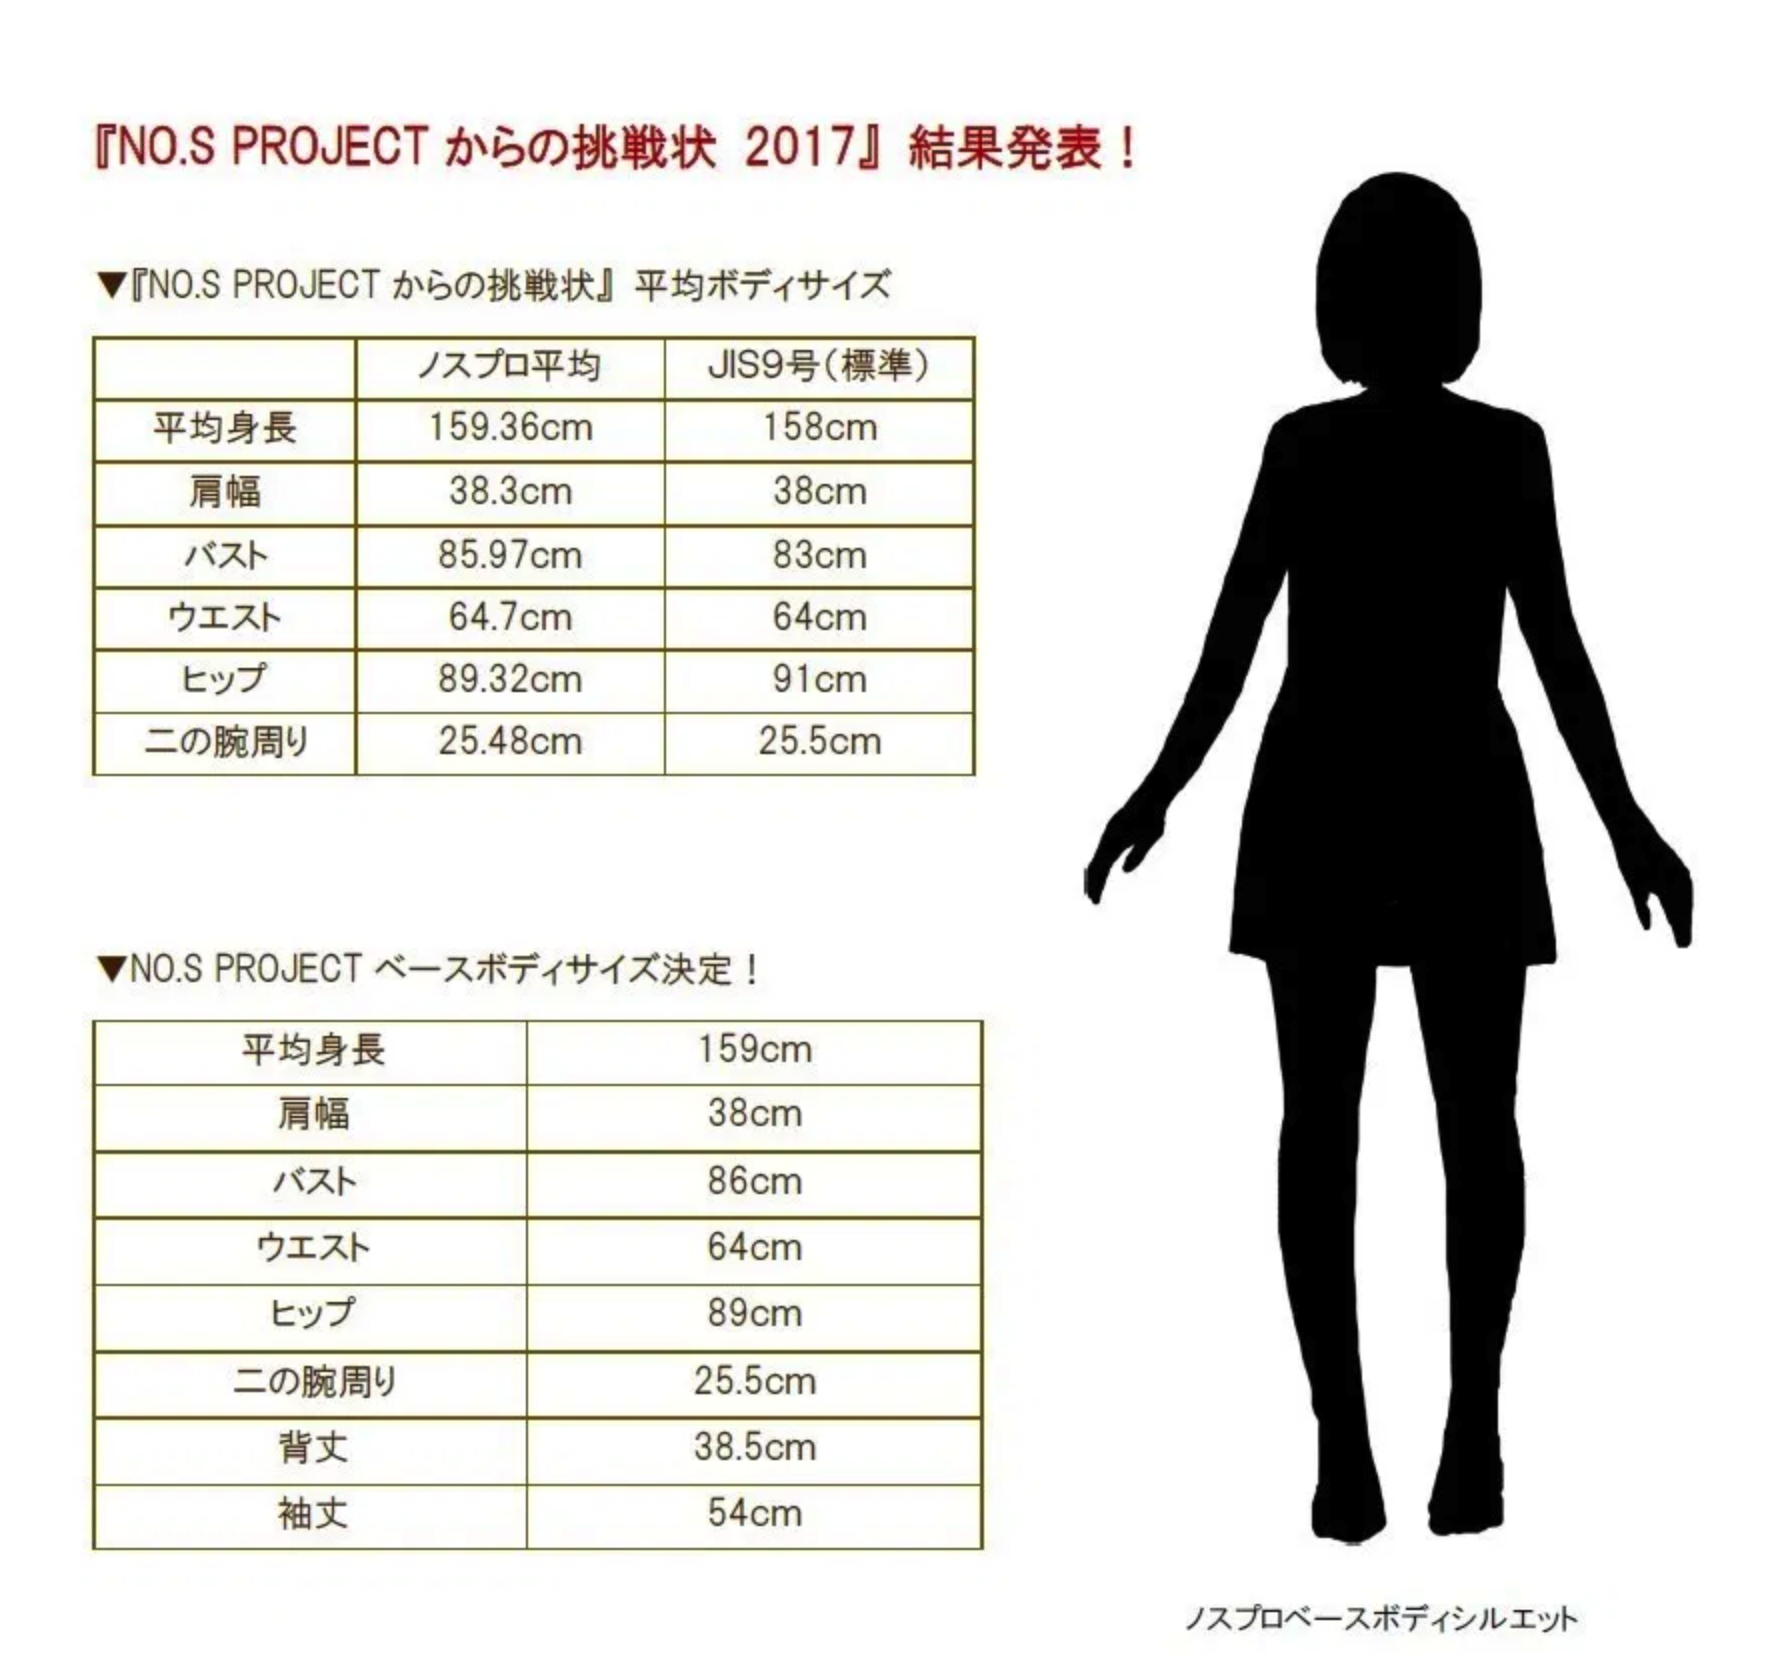 NO.S PROJECTからの挑戦状 2017』結果発表！！ | NO.S PROJECT BLOG